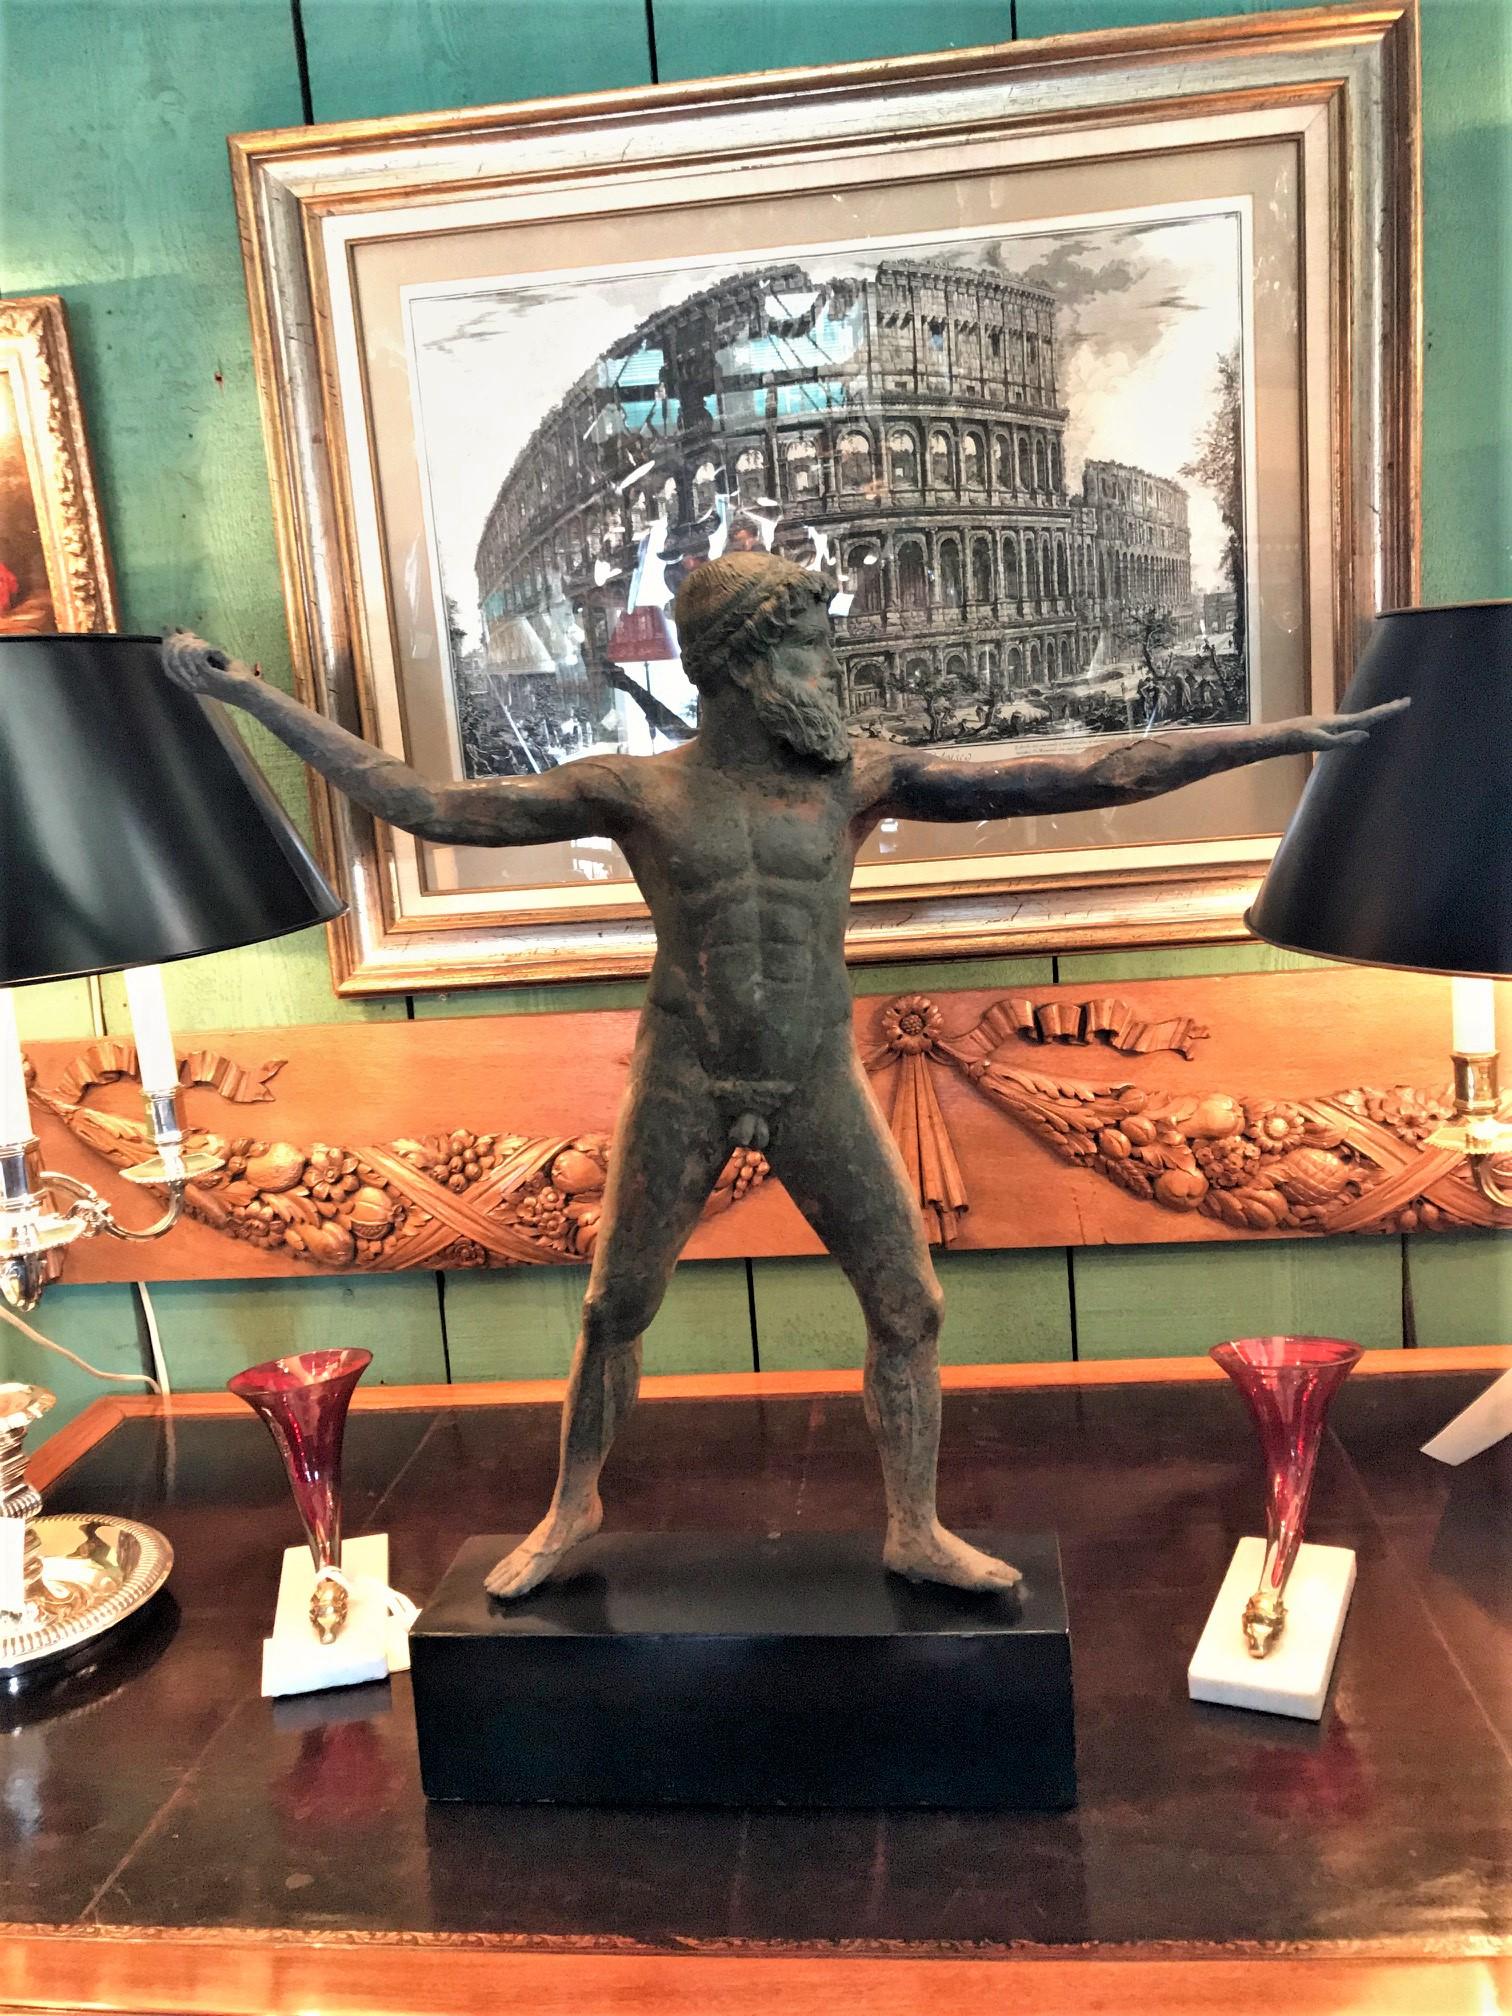 A beautiful Javelin Thrower  bronze statue of Zeus of Artemisia javelin thrower 1st -2nd quarter of the 1900s mounted on a black dark painted base in the style of a beautiful bronze statue of Zeus (or possibly Poseidon) was recovered from a